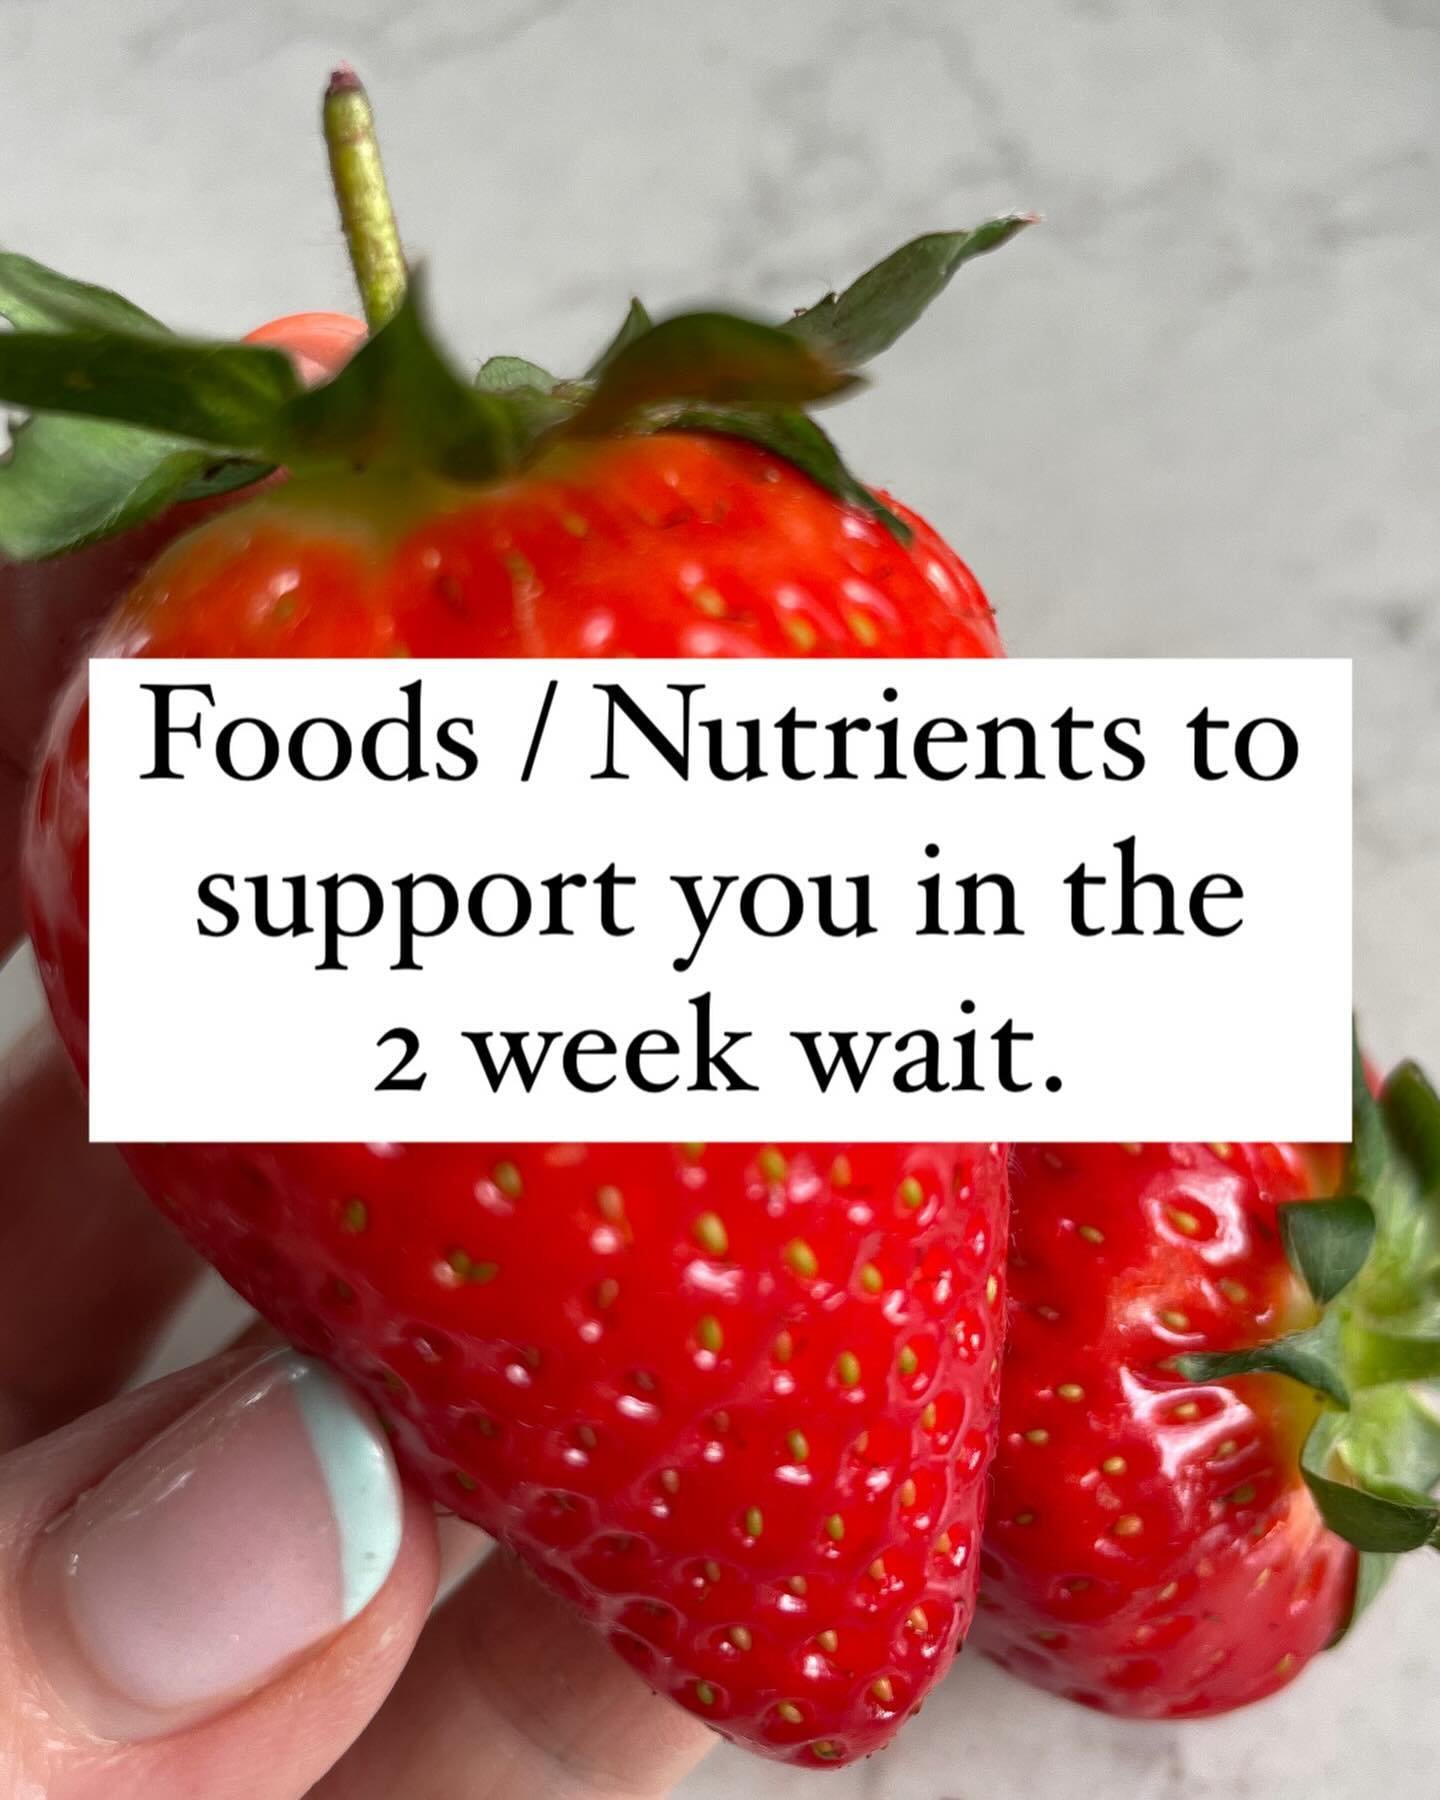 A nutrient-rich diet that&rsquo;s rich in fruits, veggies, and whole grains sets the stage for successful implantation. These foods are packed with antioxidants that create nourishment for egg / sperm health aswell as an ideal uterine environment for